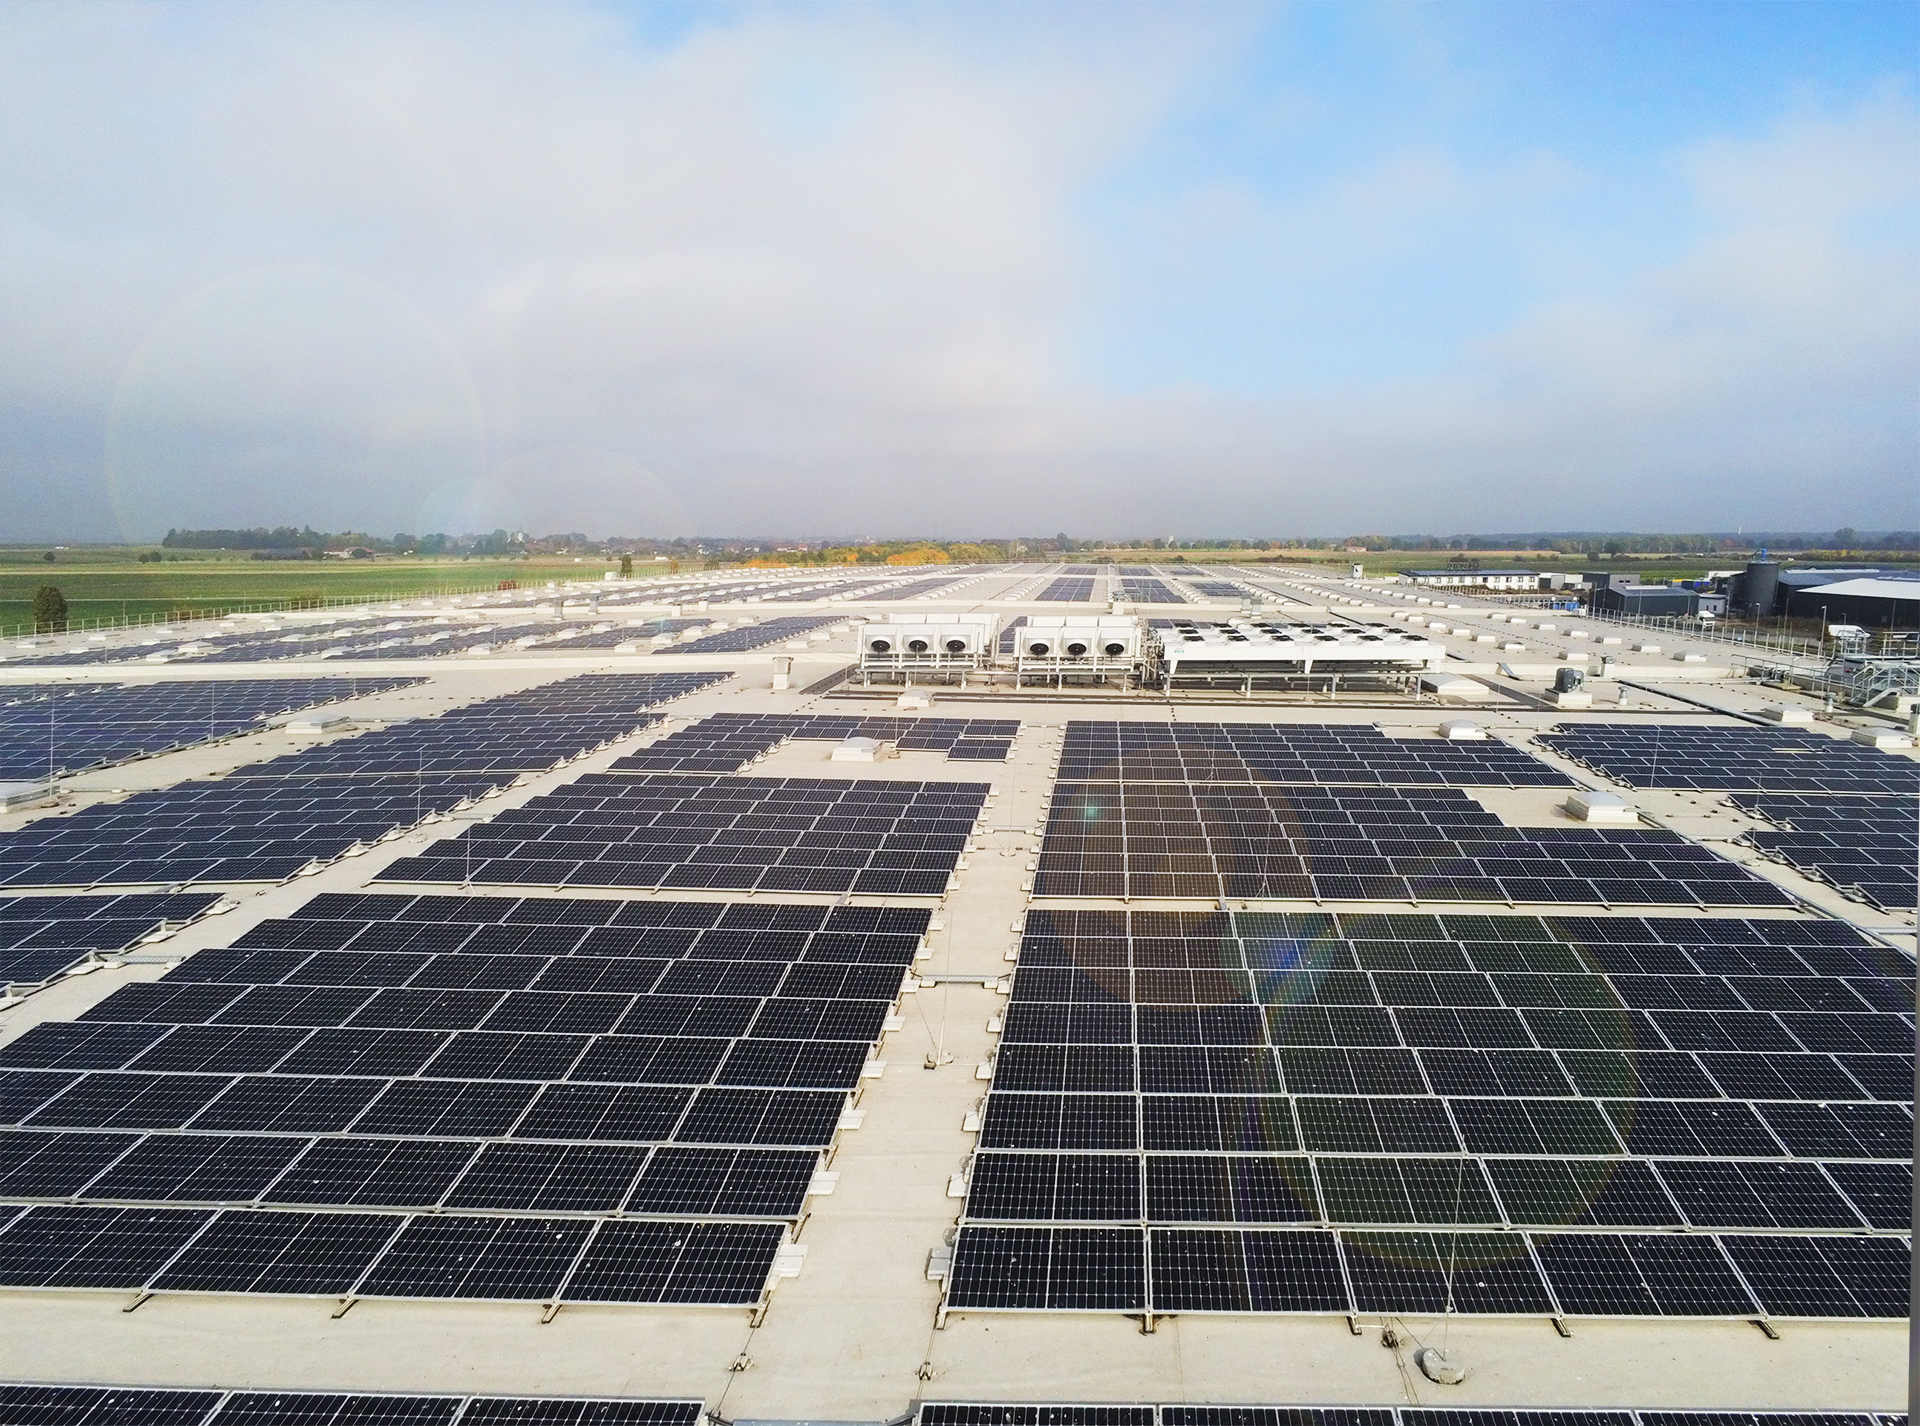 Roof of a supermarket chain which installed photovoltaic rooftop systems with SENS